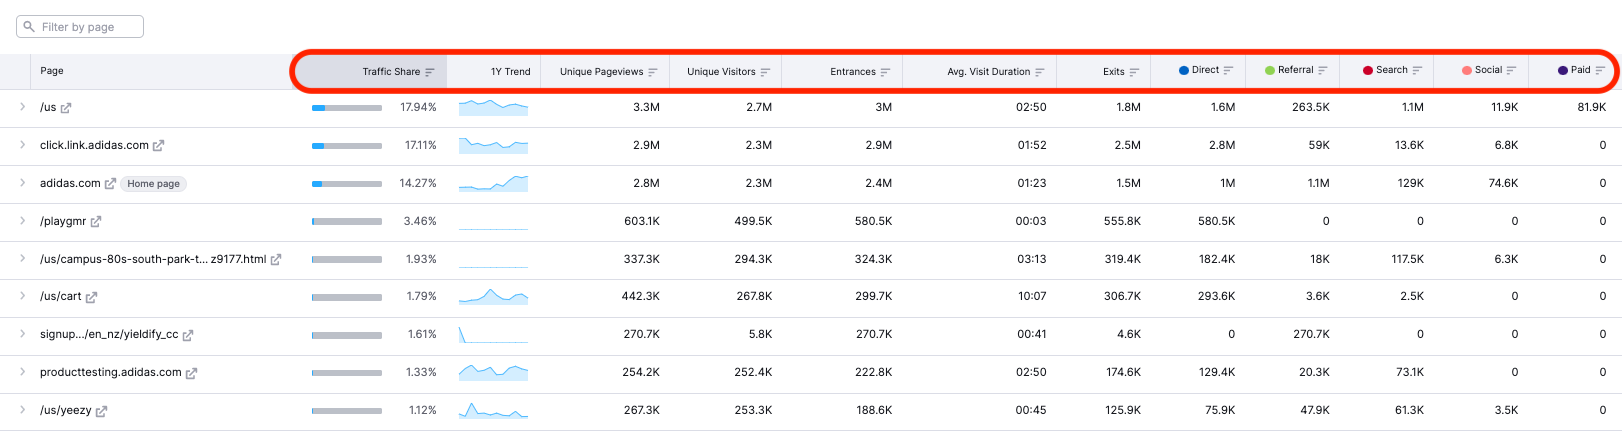 Top Pages metrics